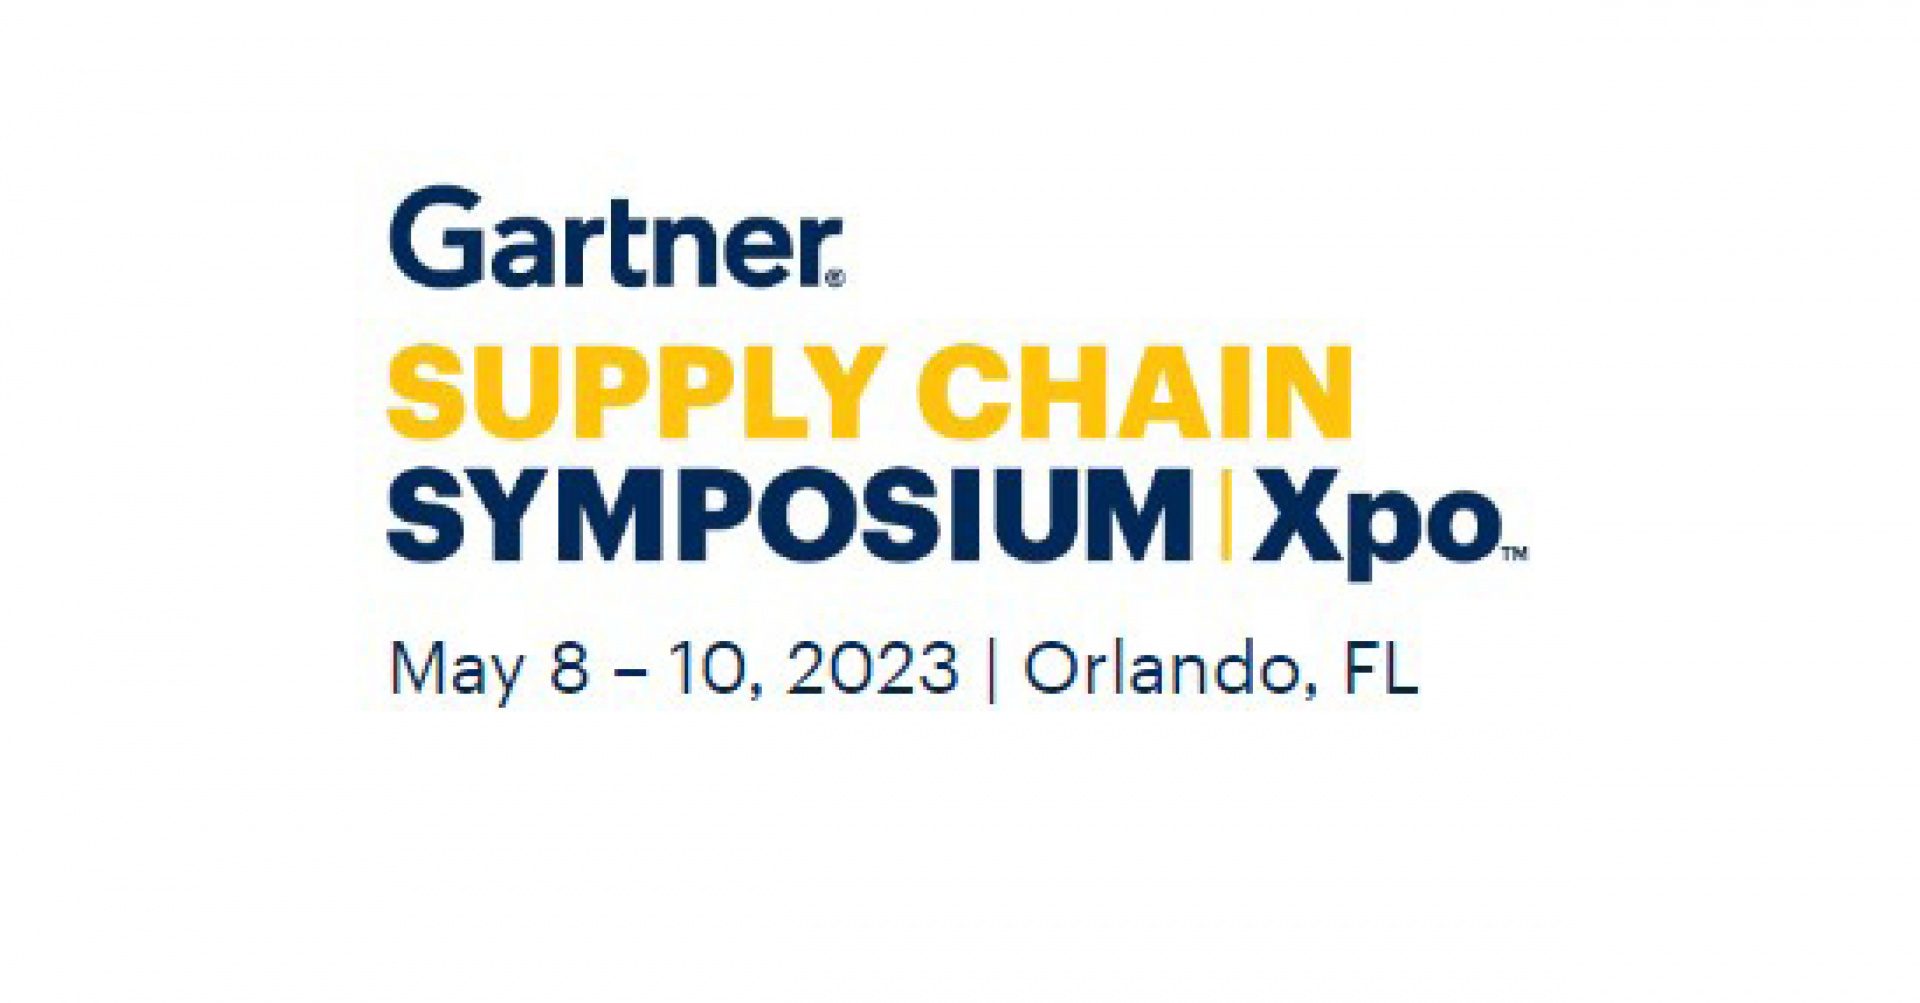 Join ORTEC at the Gartner Supply Chain Symposium ORTEC